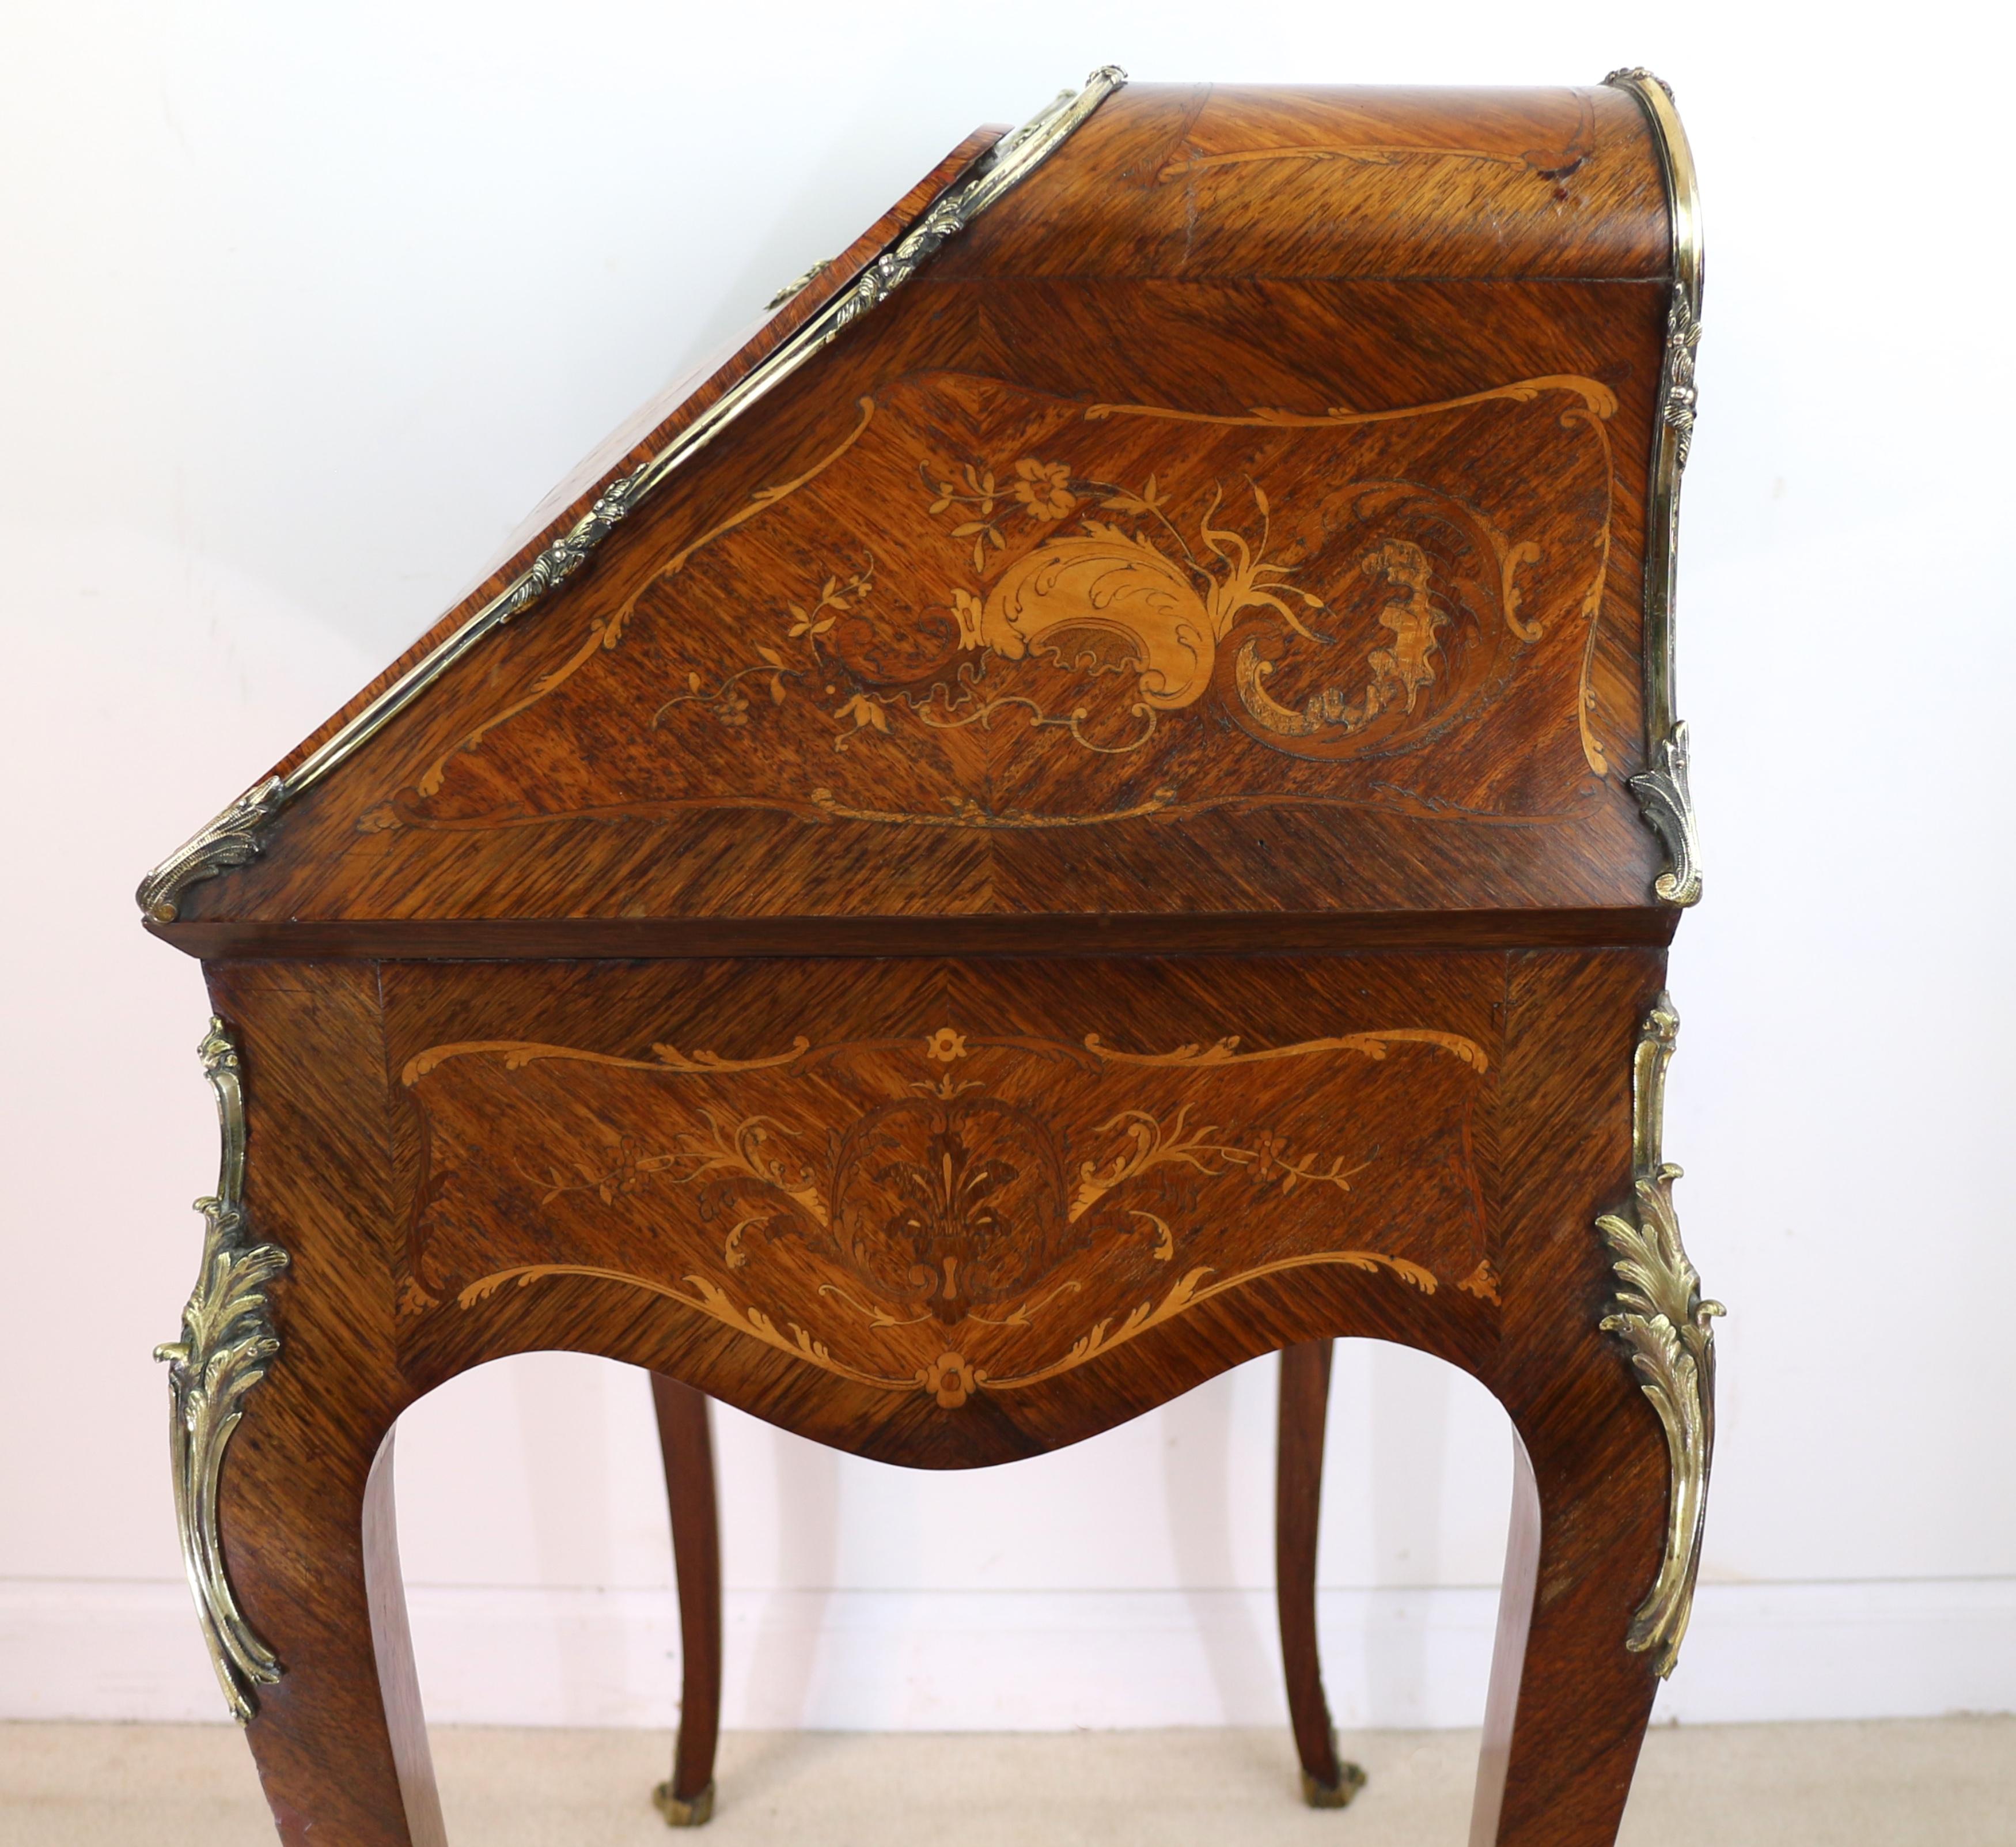 Antique French Louis XV Style Kingwood and Marquetry Bureau de Dame For Sale 5